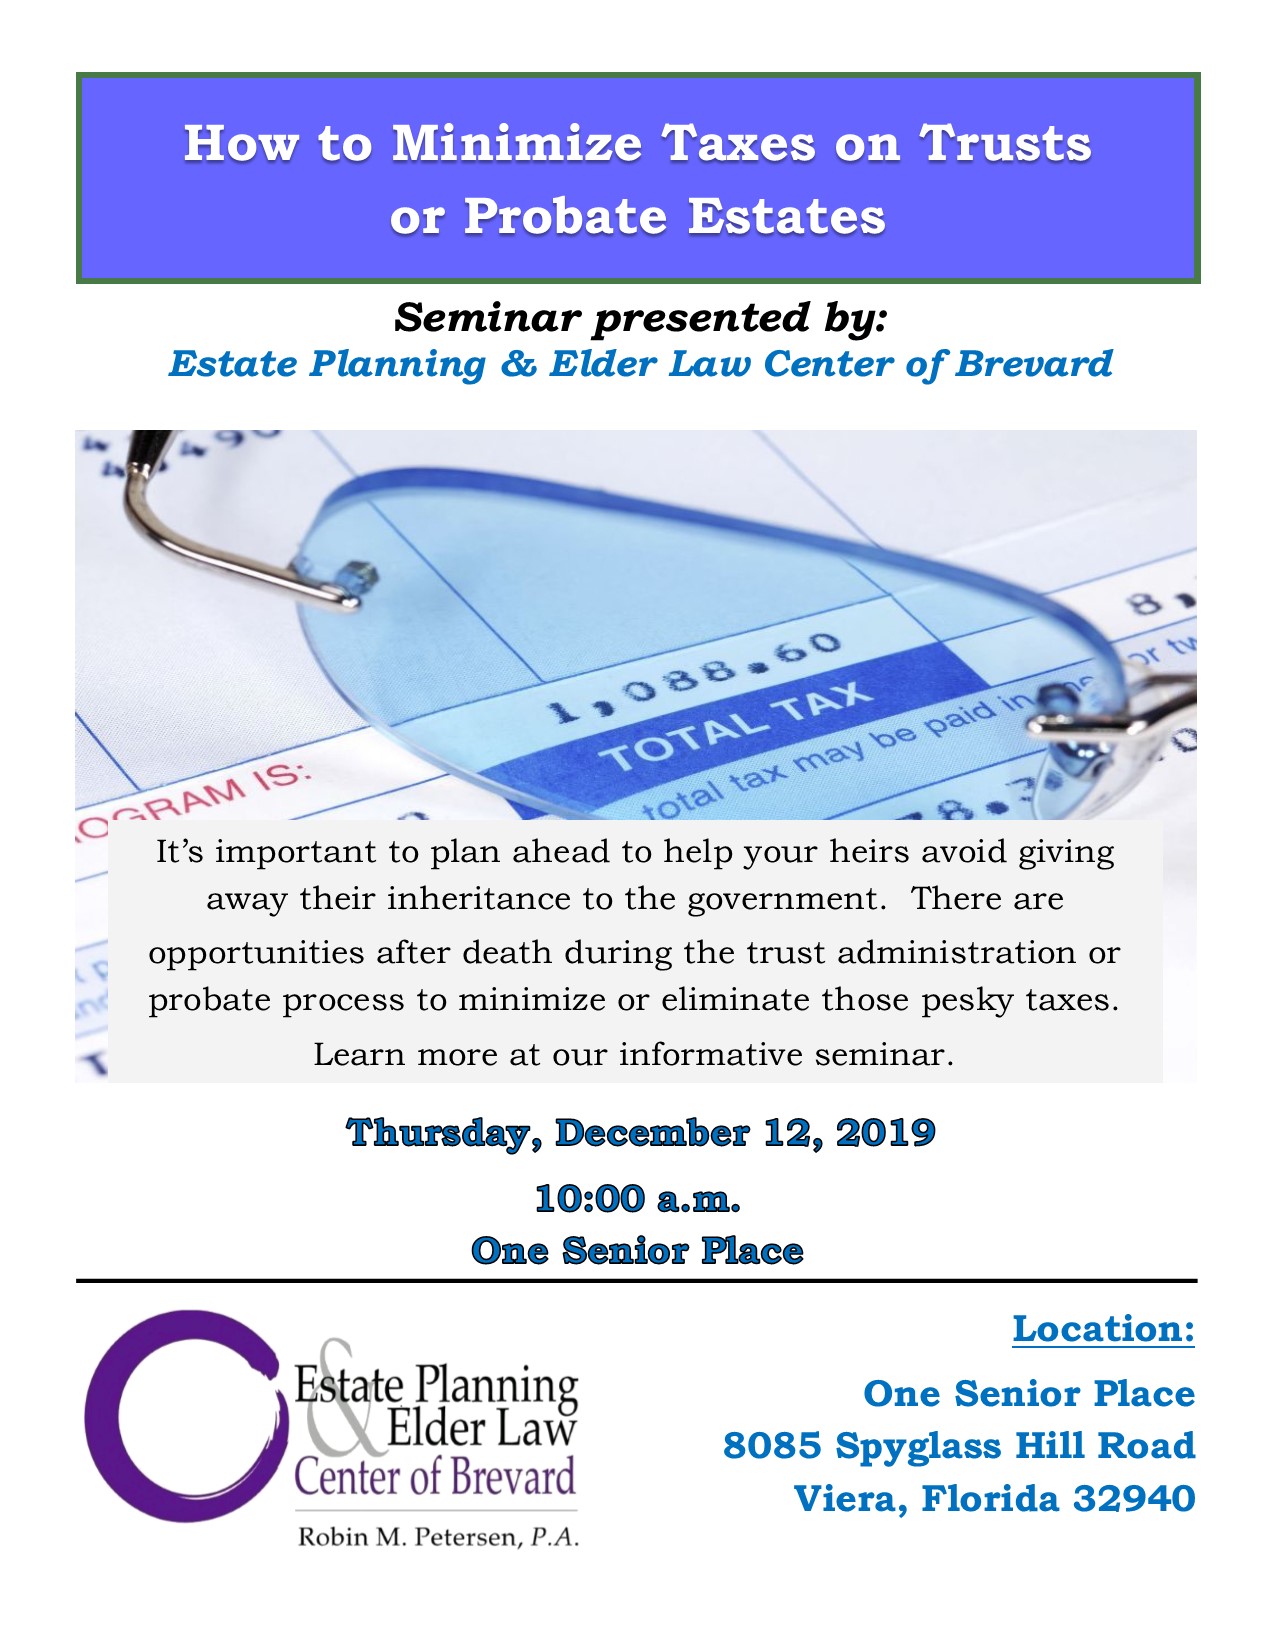 How to Minimize Taxes on Trusts or Probate Estates Presented by Estate Planning and Elder Law Center of Brevard